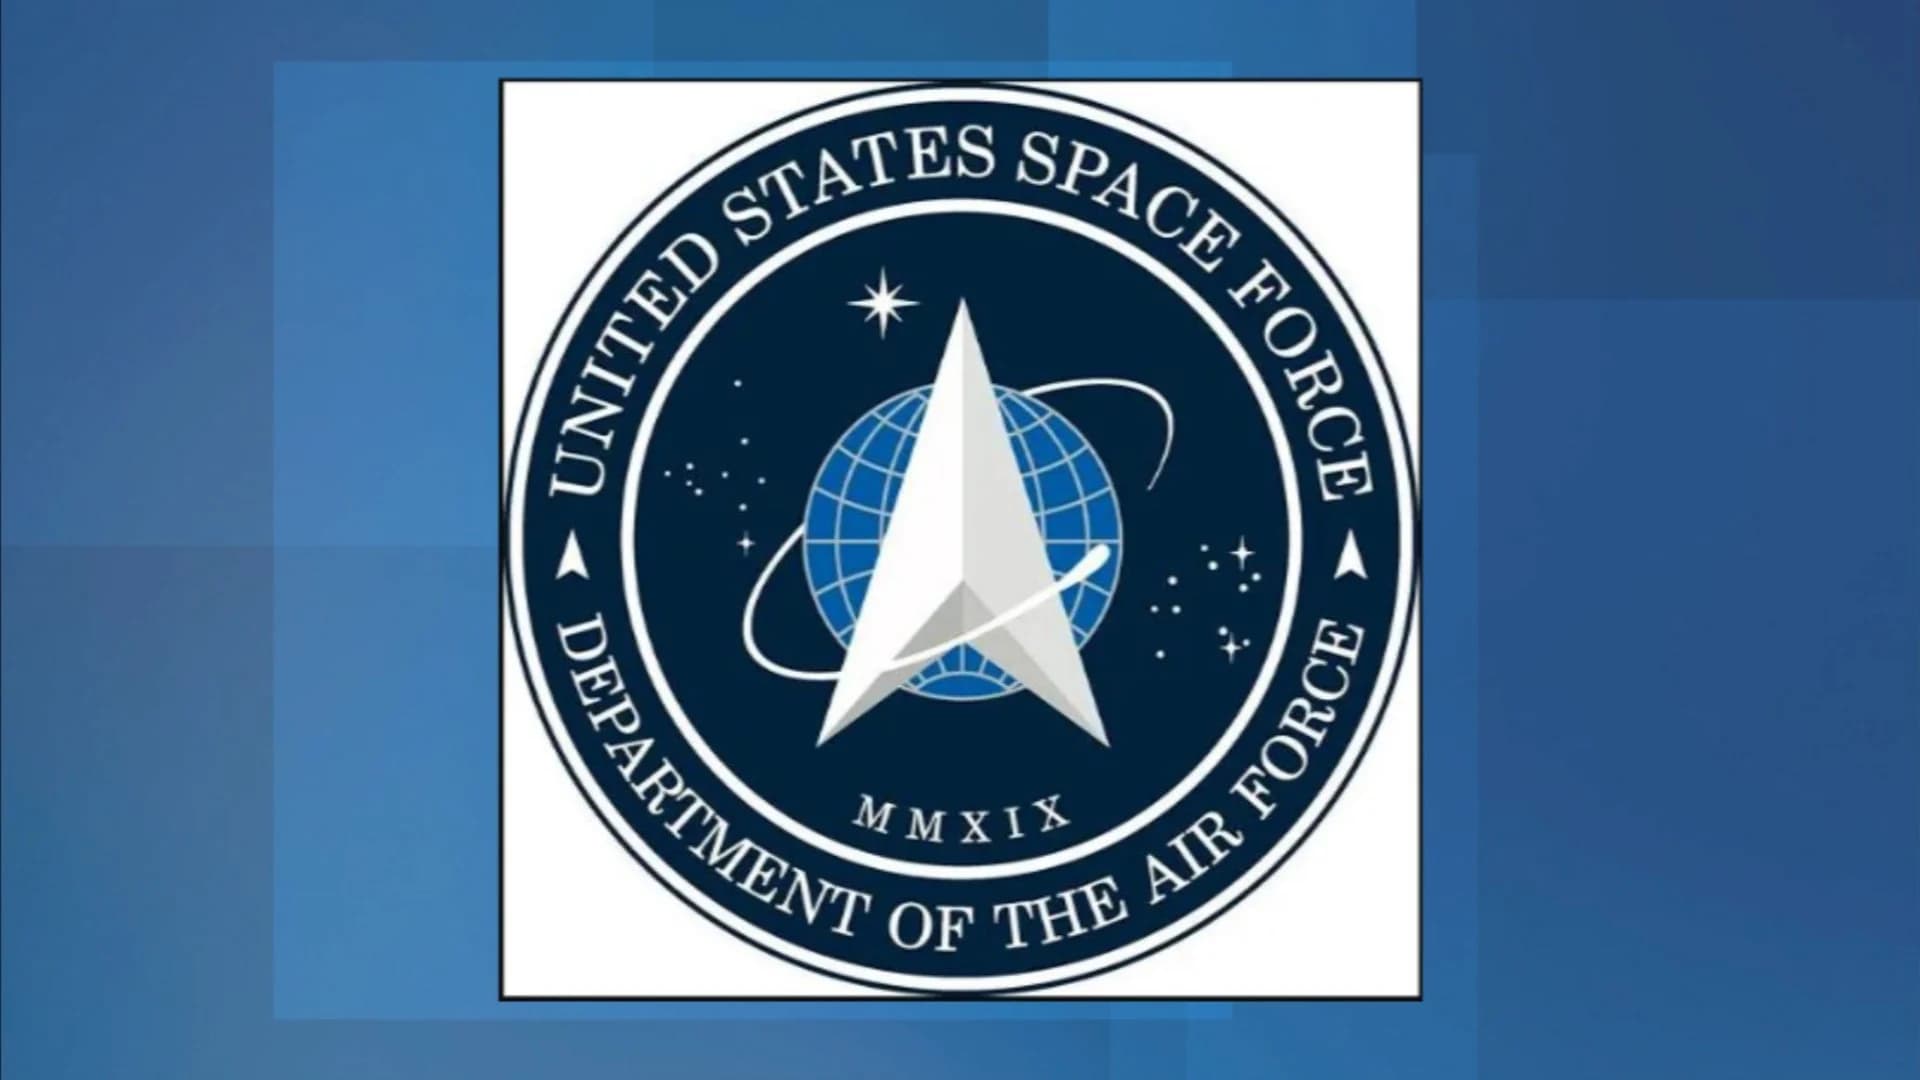 President Trump touts logo for new Space Force, with nod to Star Trek